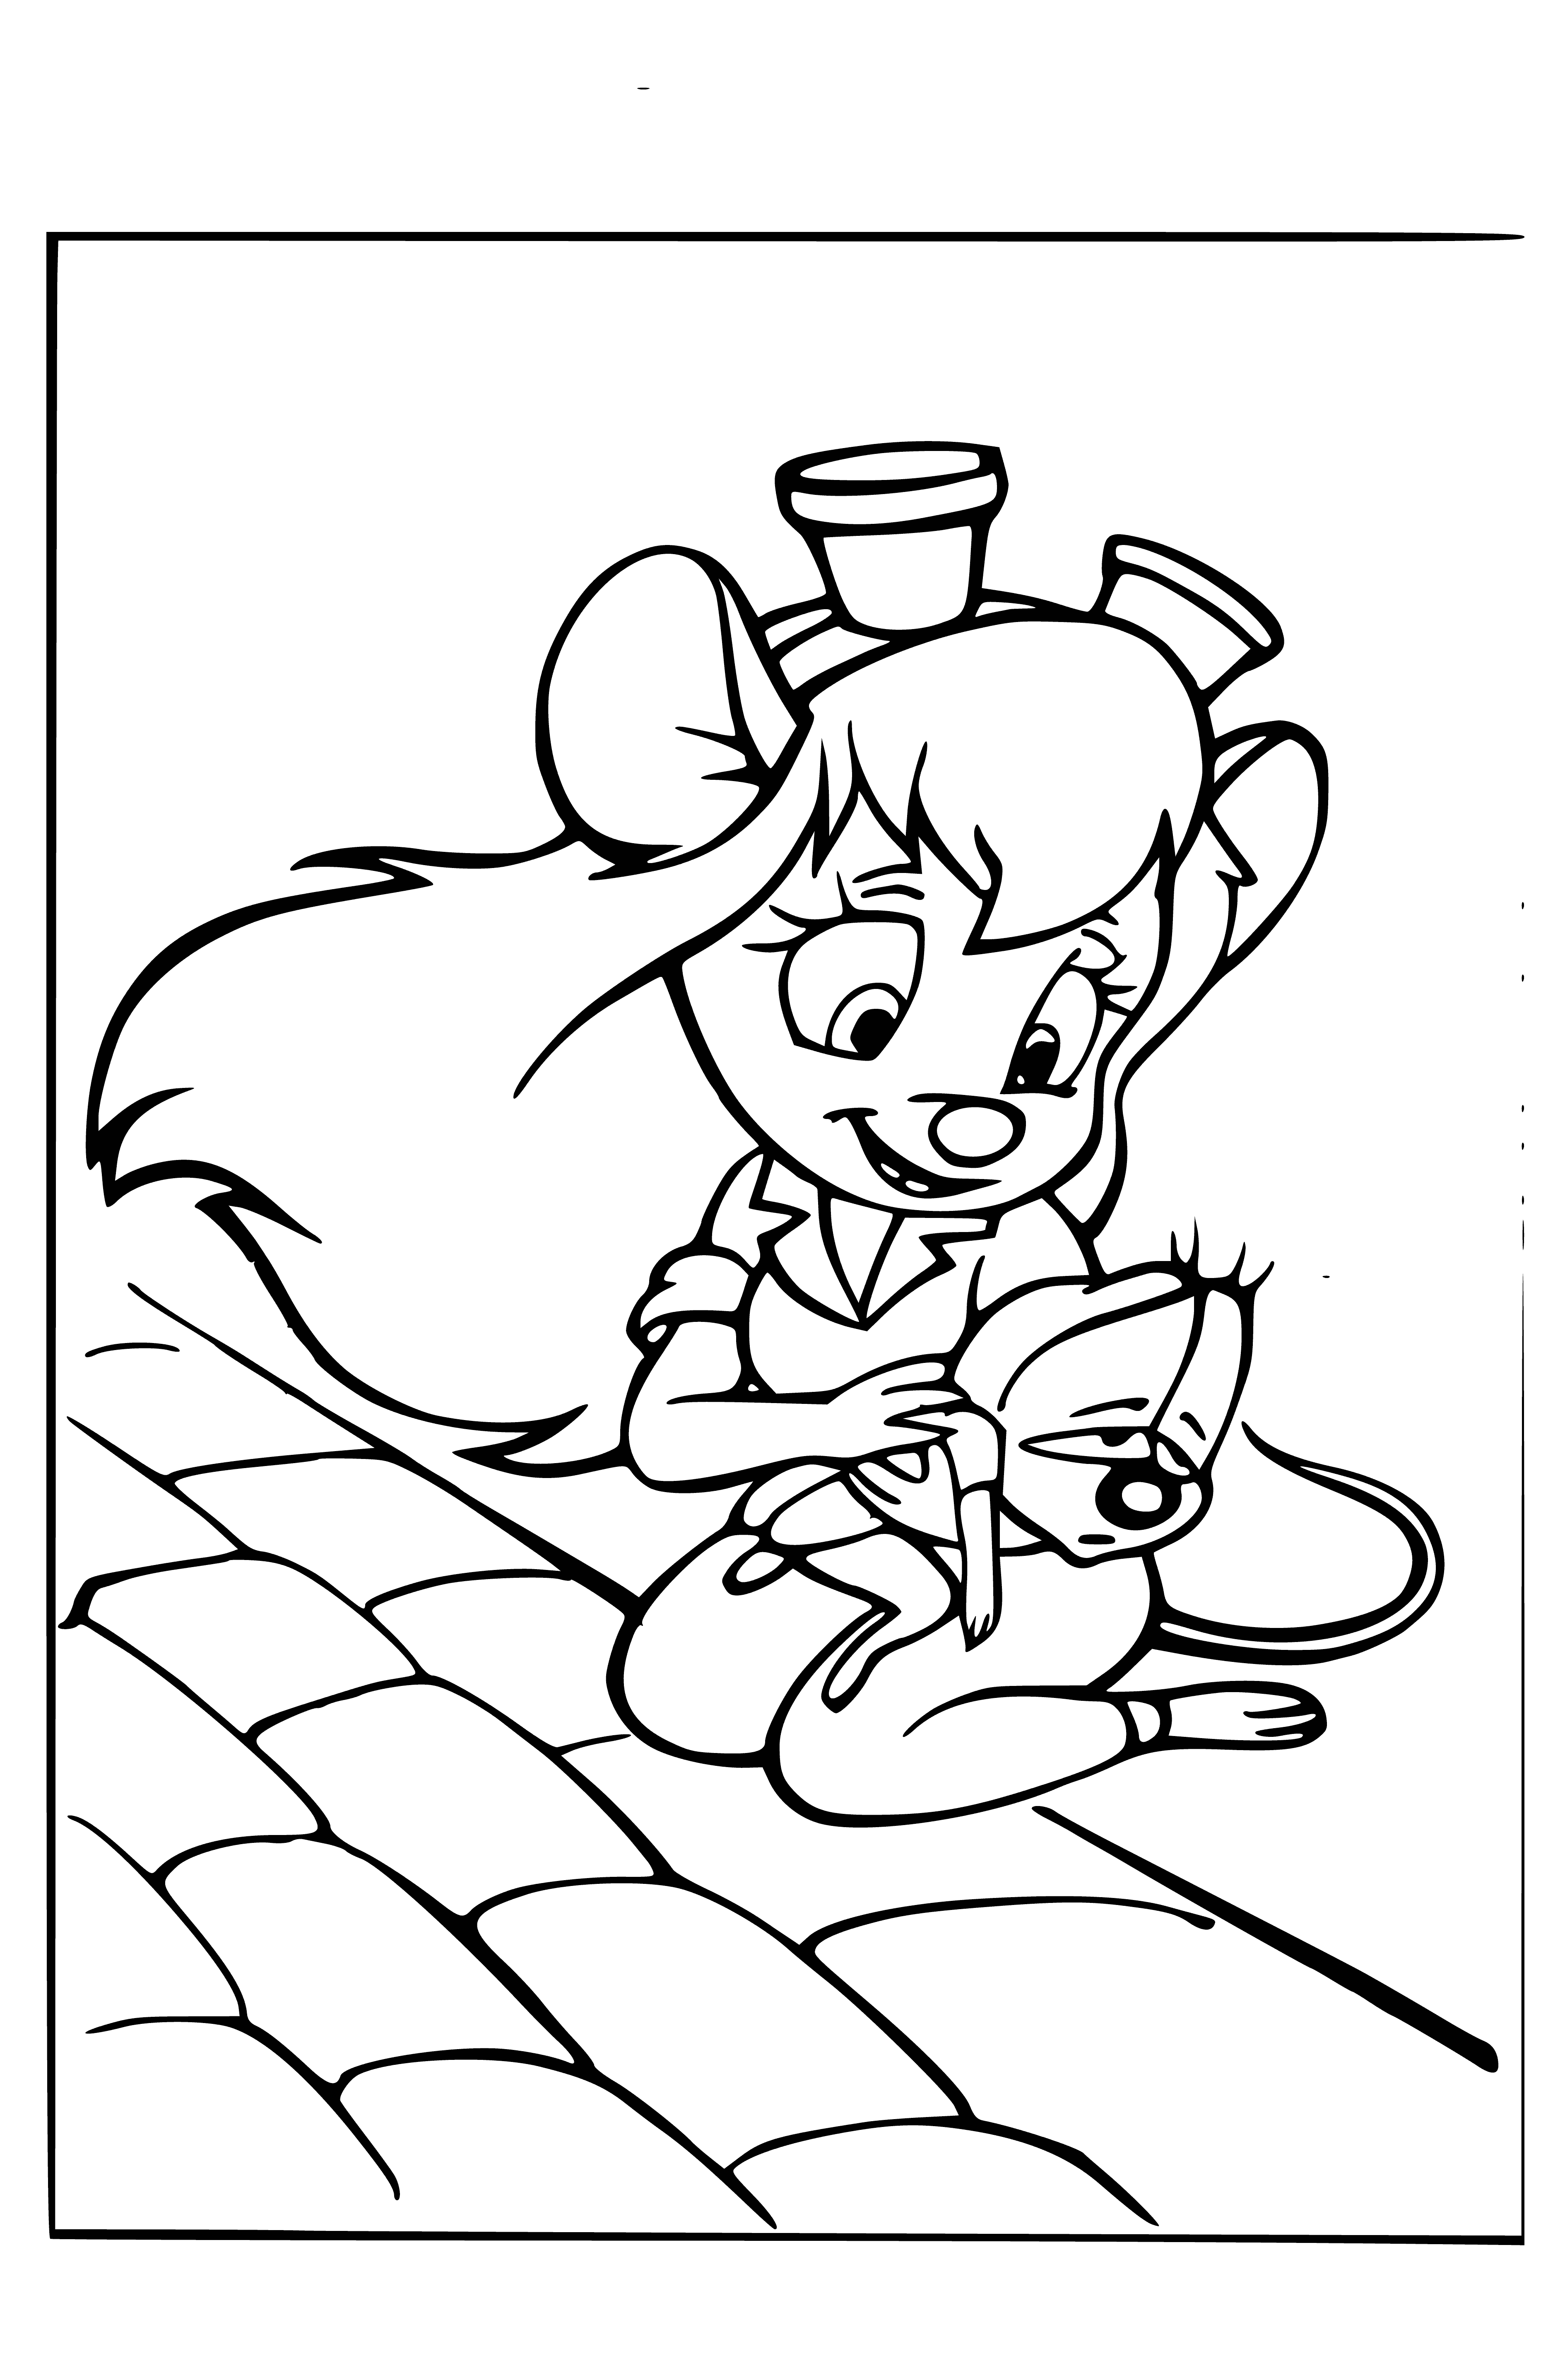 Gadget and Zipper coloring page